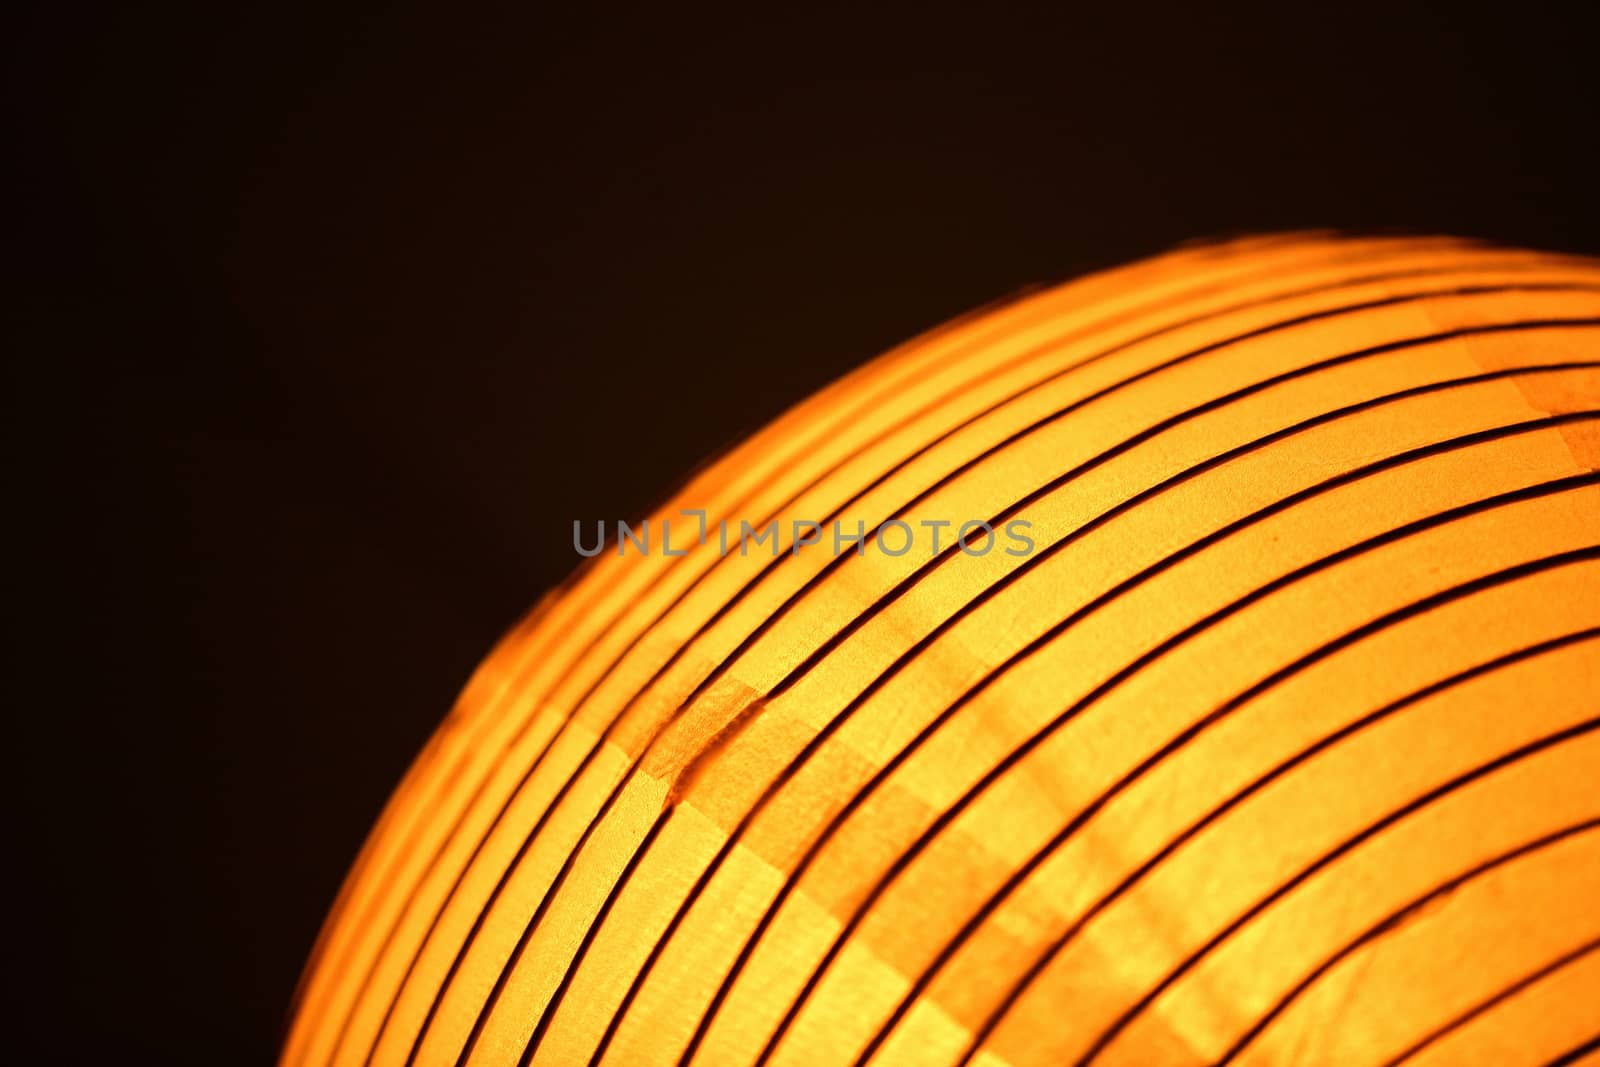 Orange yellow Chinese traditional paper lantern light in curved line semi abstract image on plain black studio background. 